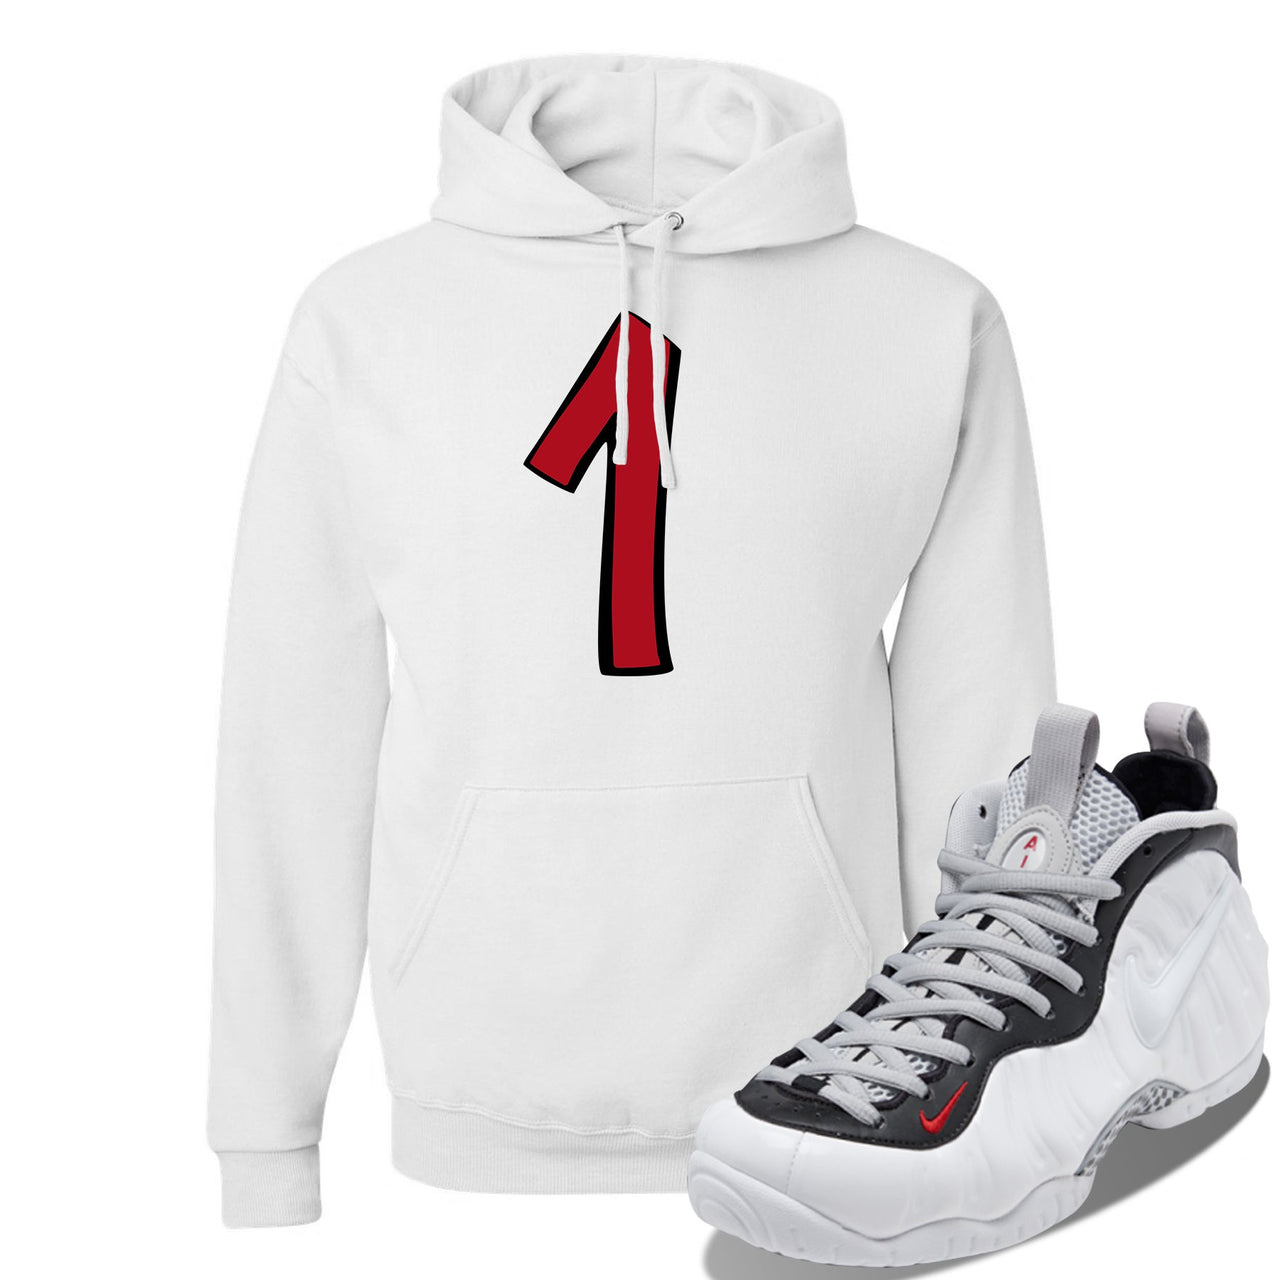 Foamposite Pro White Black University Red Sneaker White Pullover Hoodie | Hoodie to match Nike Air Foamposite Pro White Black University Red Shoes | Penny One